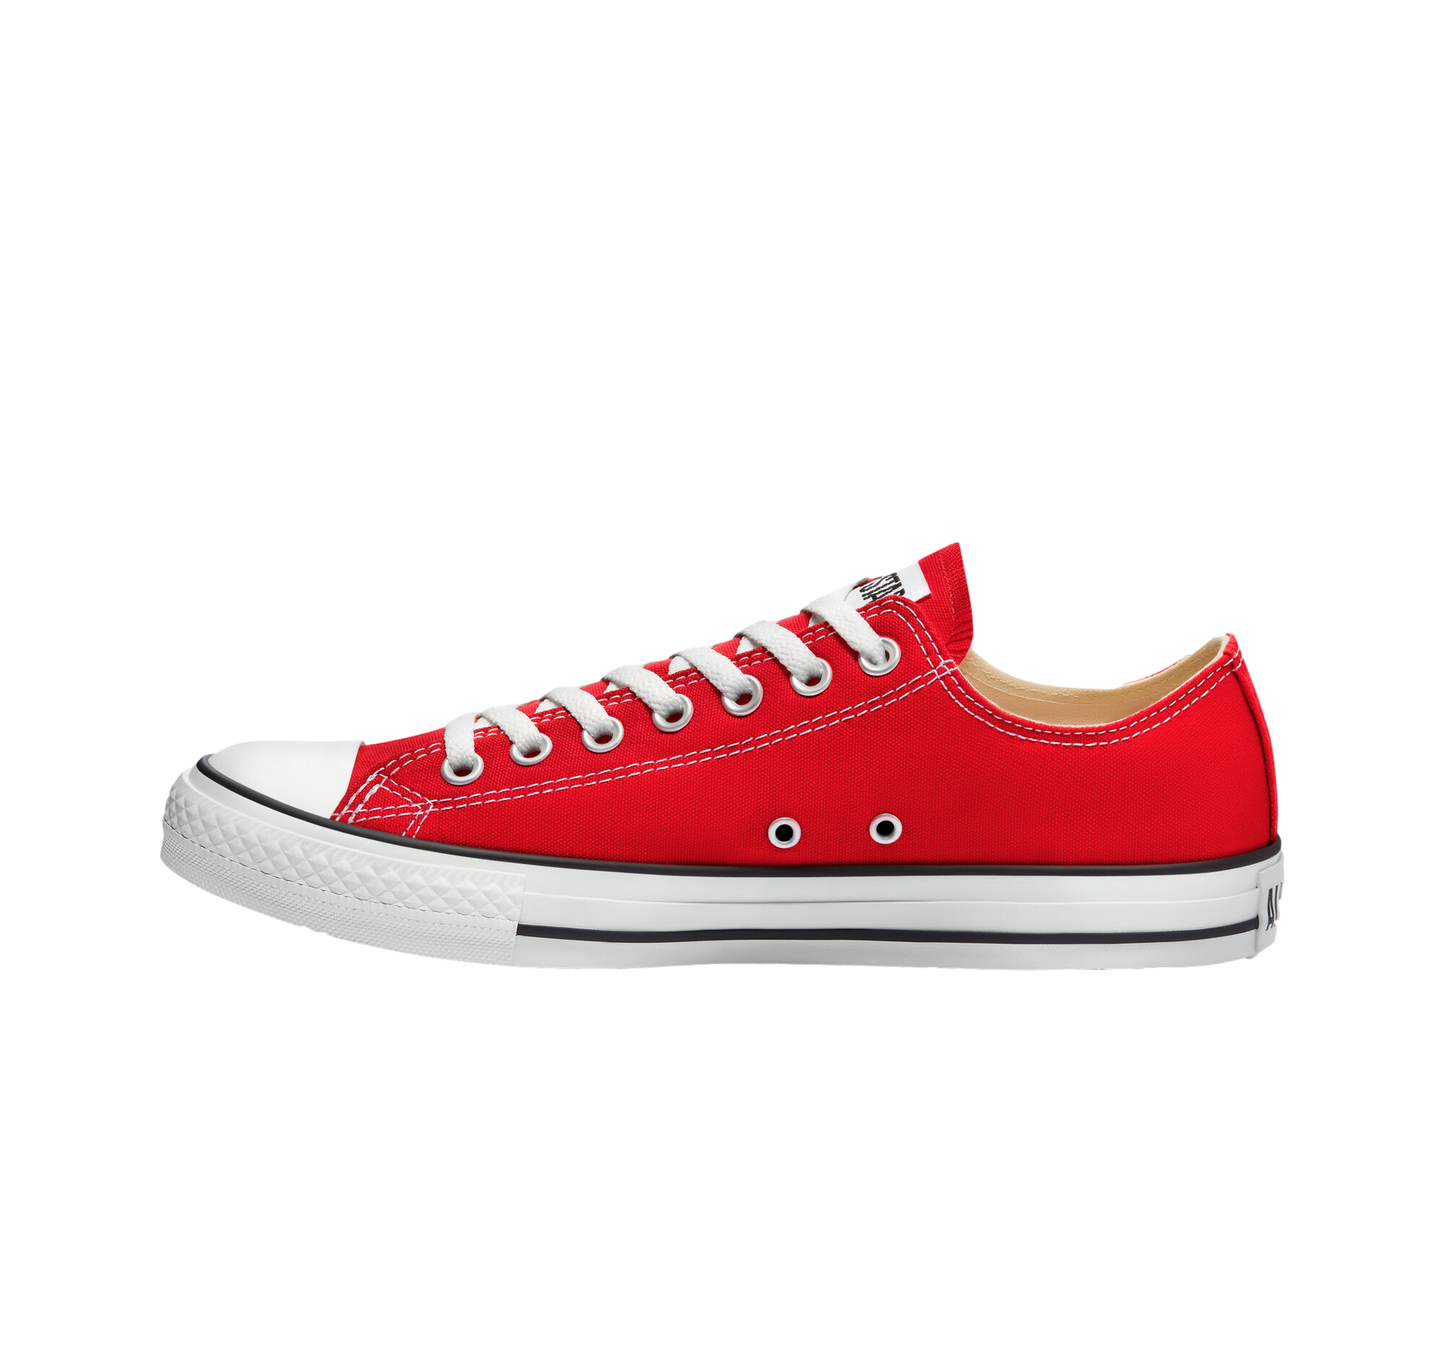 Converse Chuck Low Red - 06021